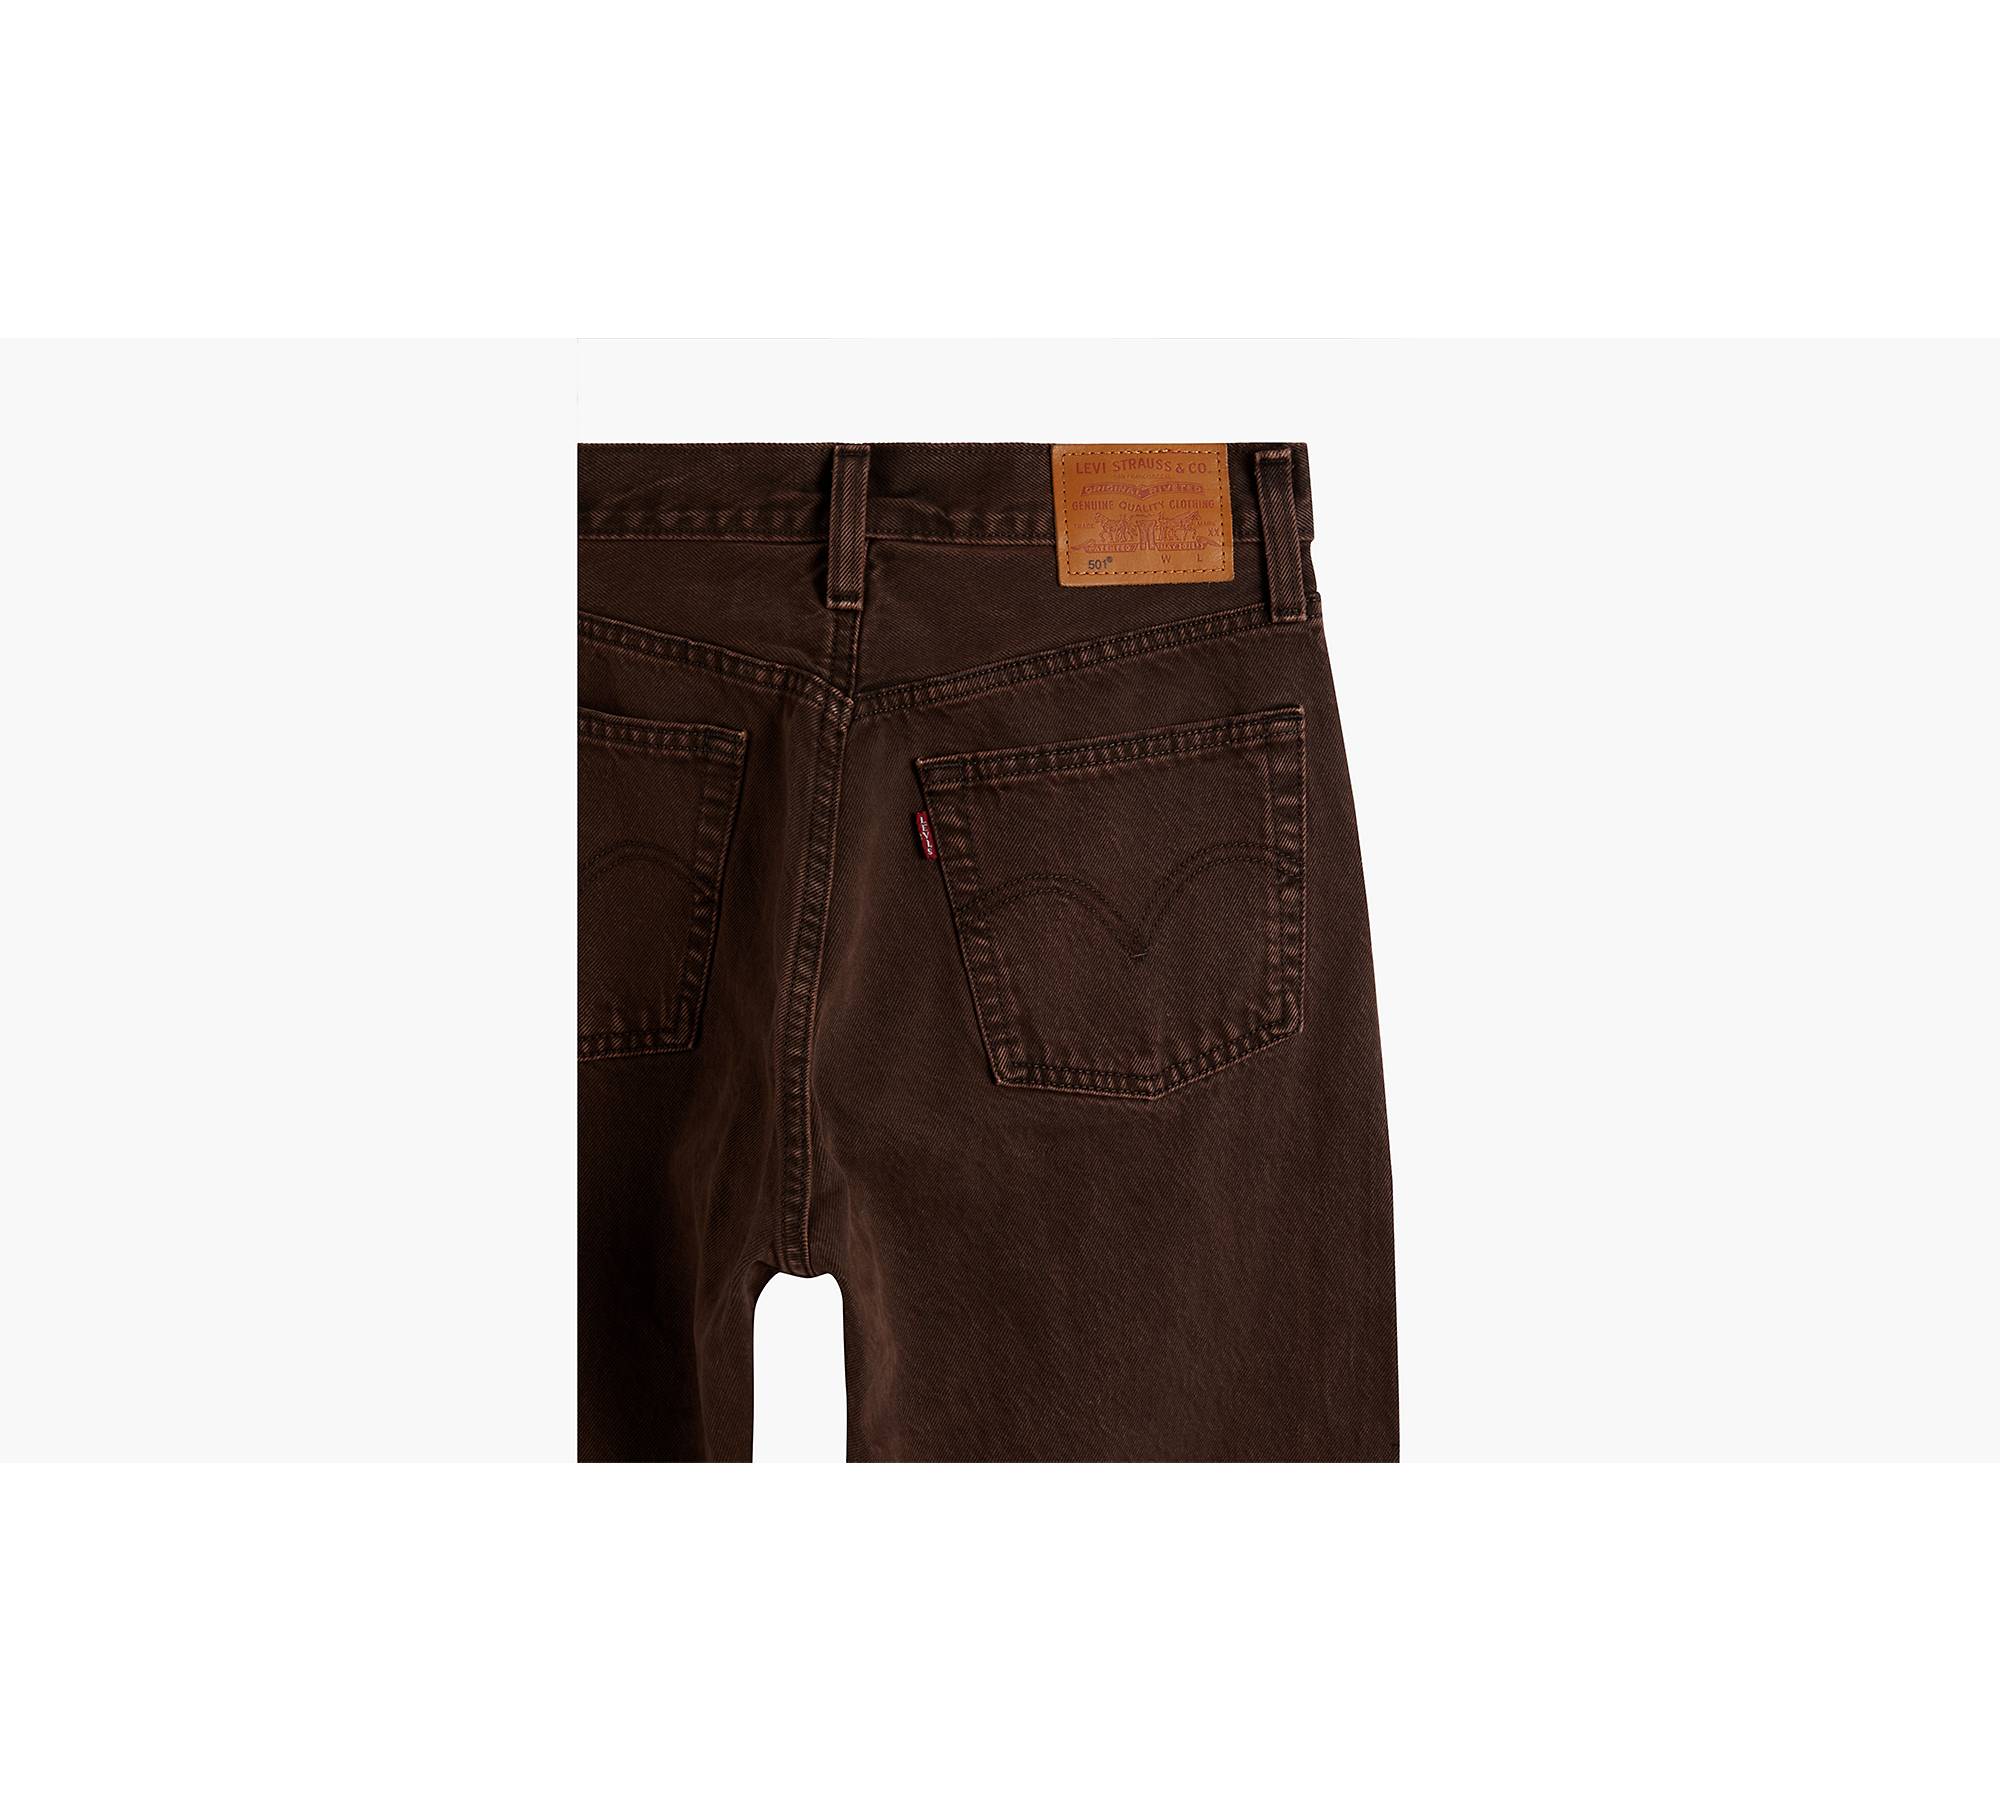 Classic Brown Levis 501 Jeans for a Timeless Look